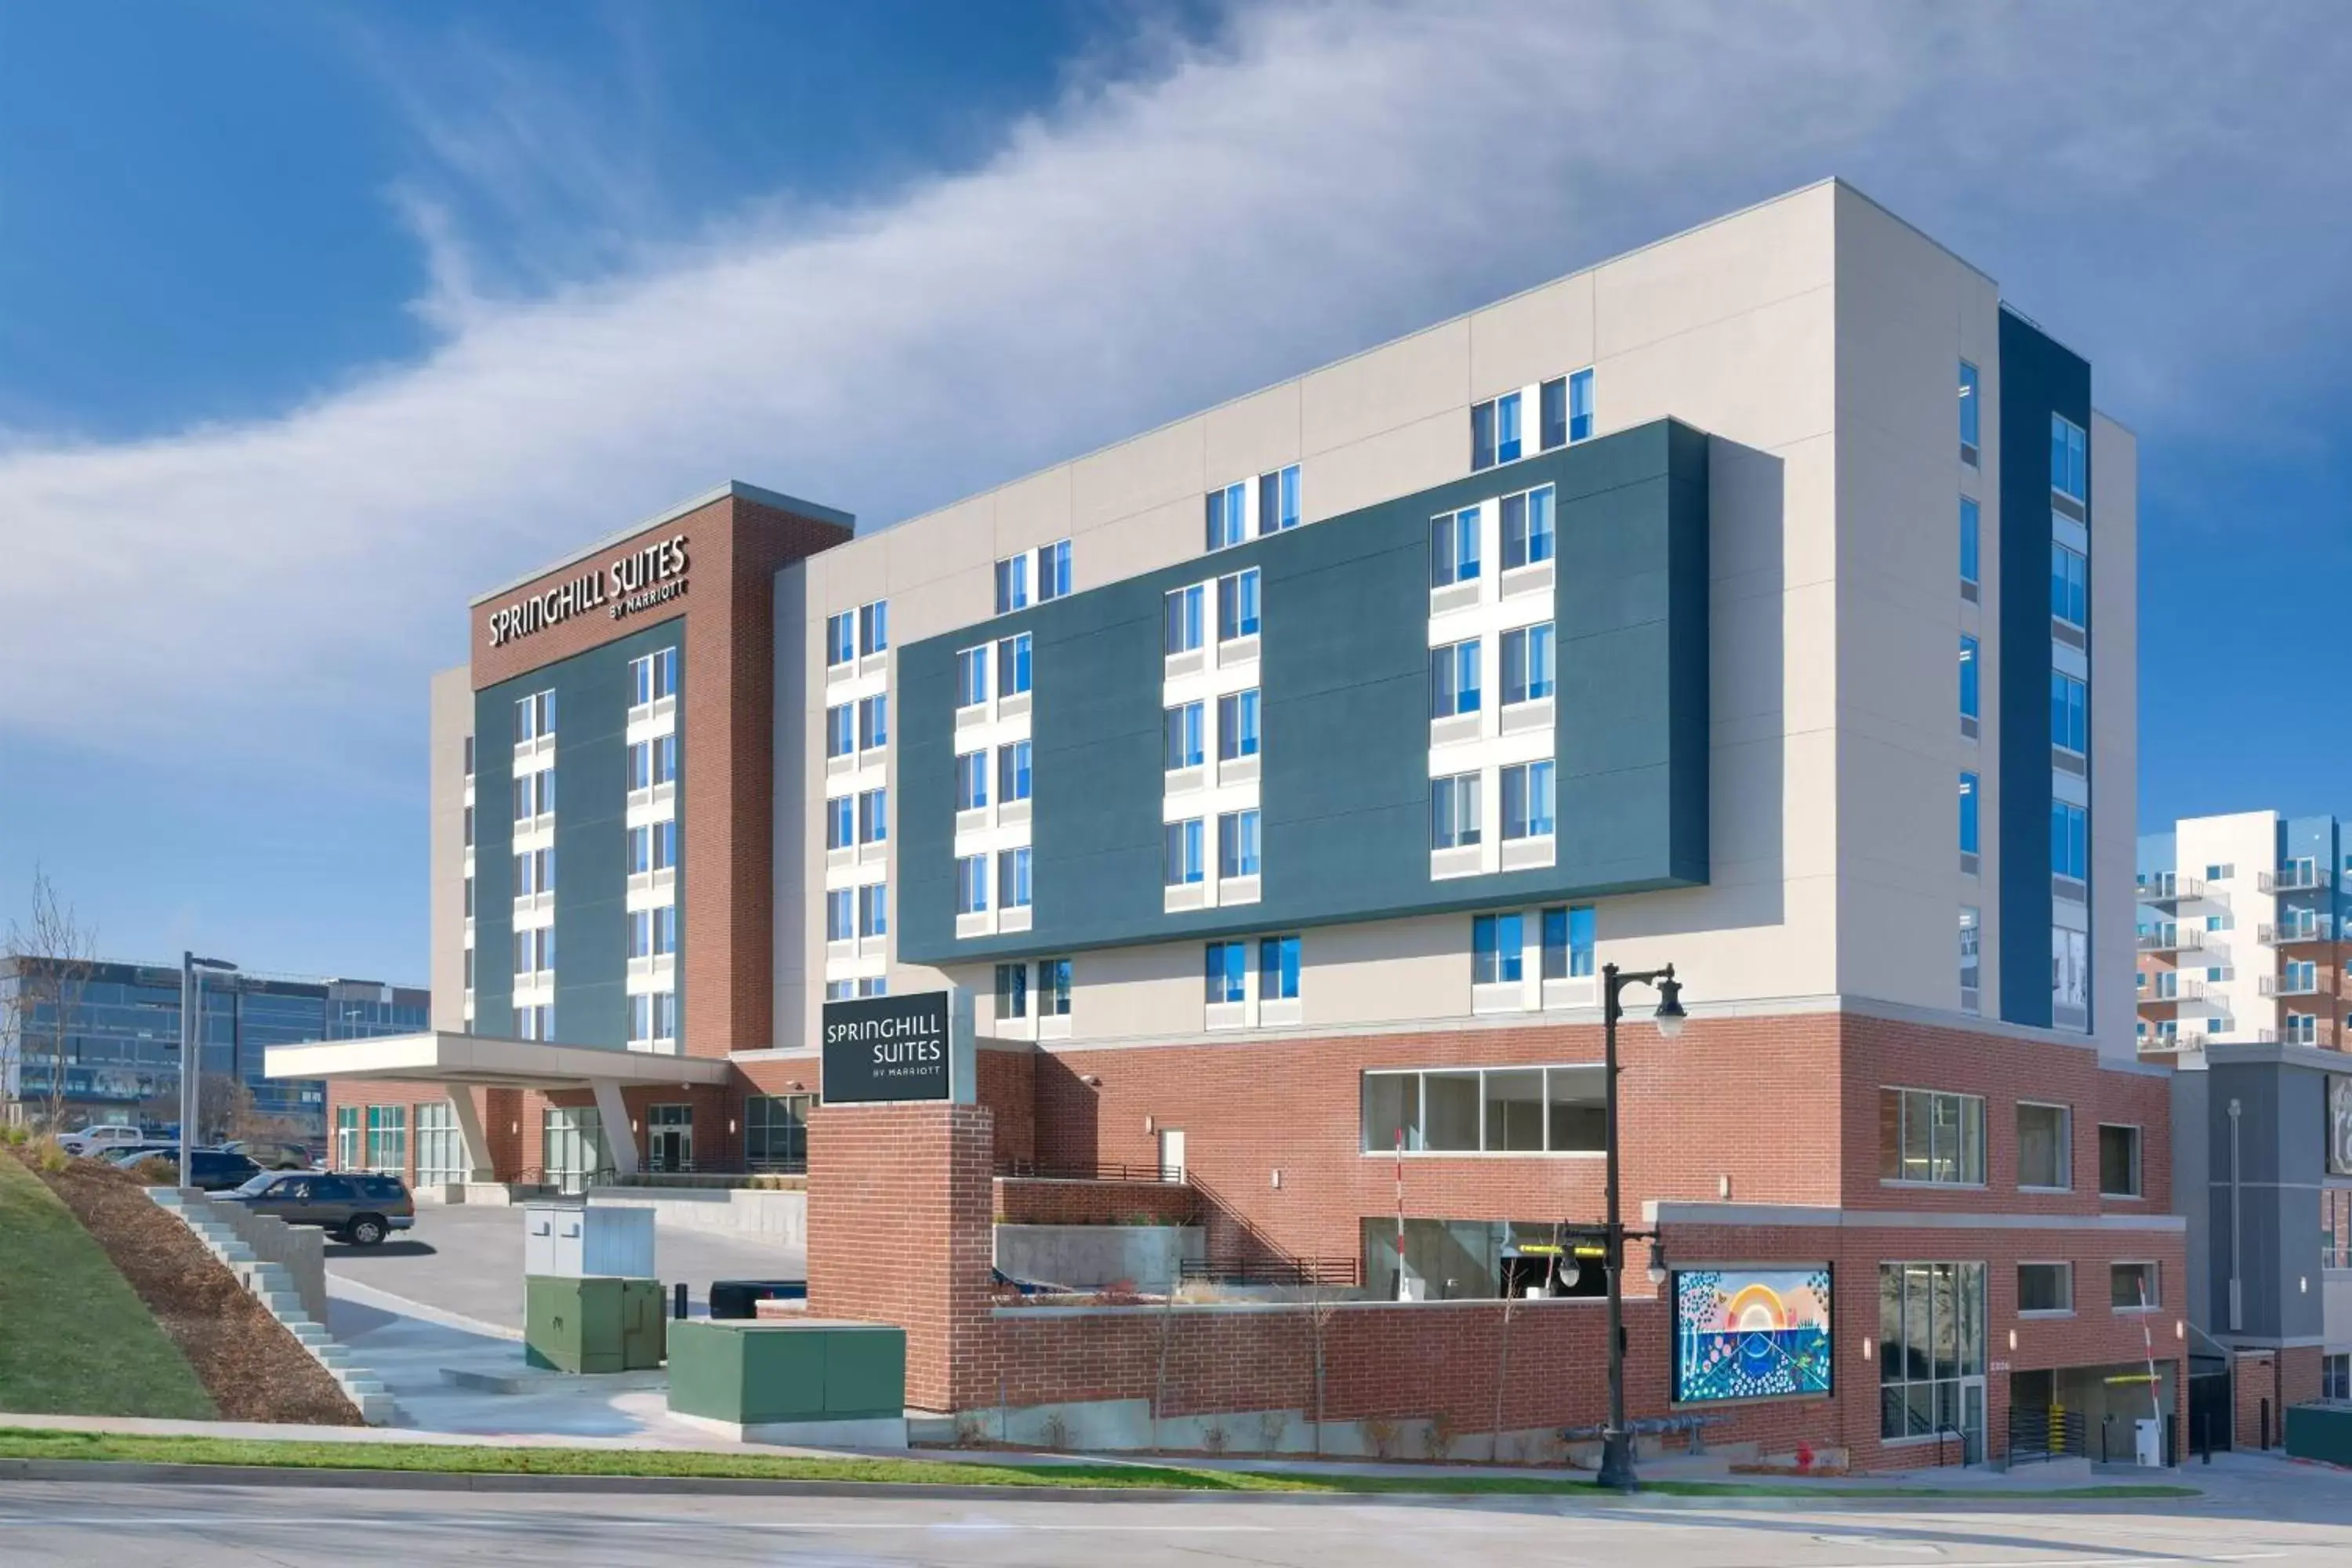 Property Building in SpringHill Suites by Marriott Salt Lake City Sugar House